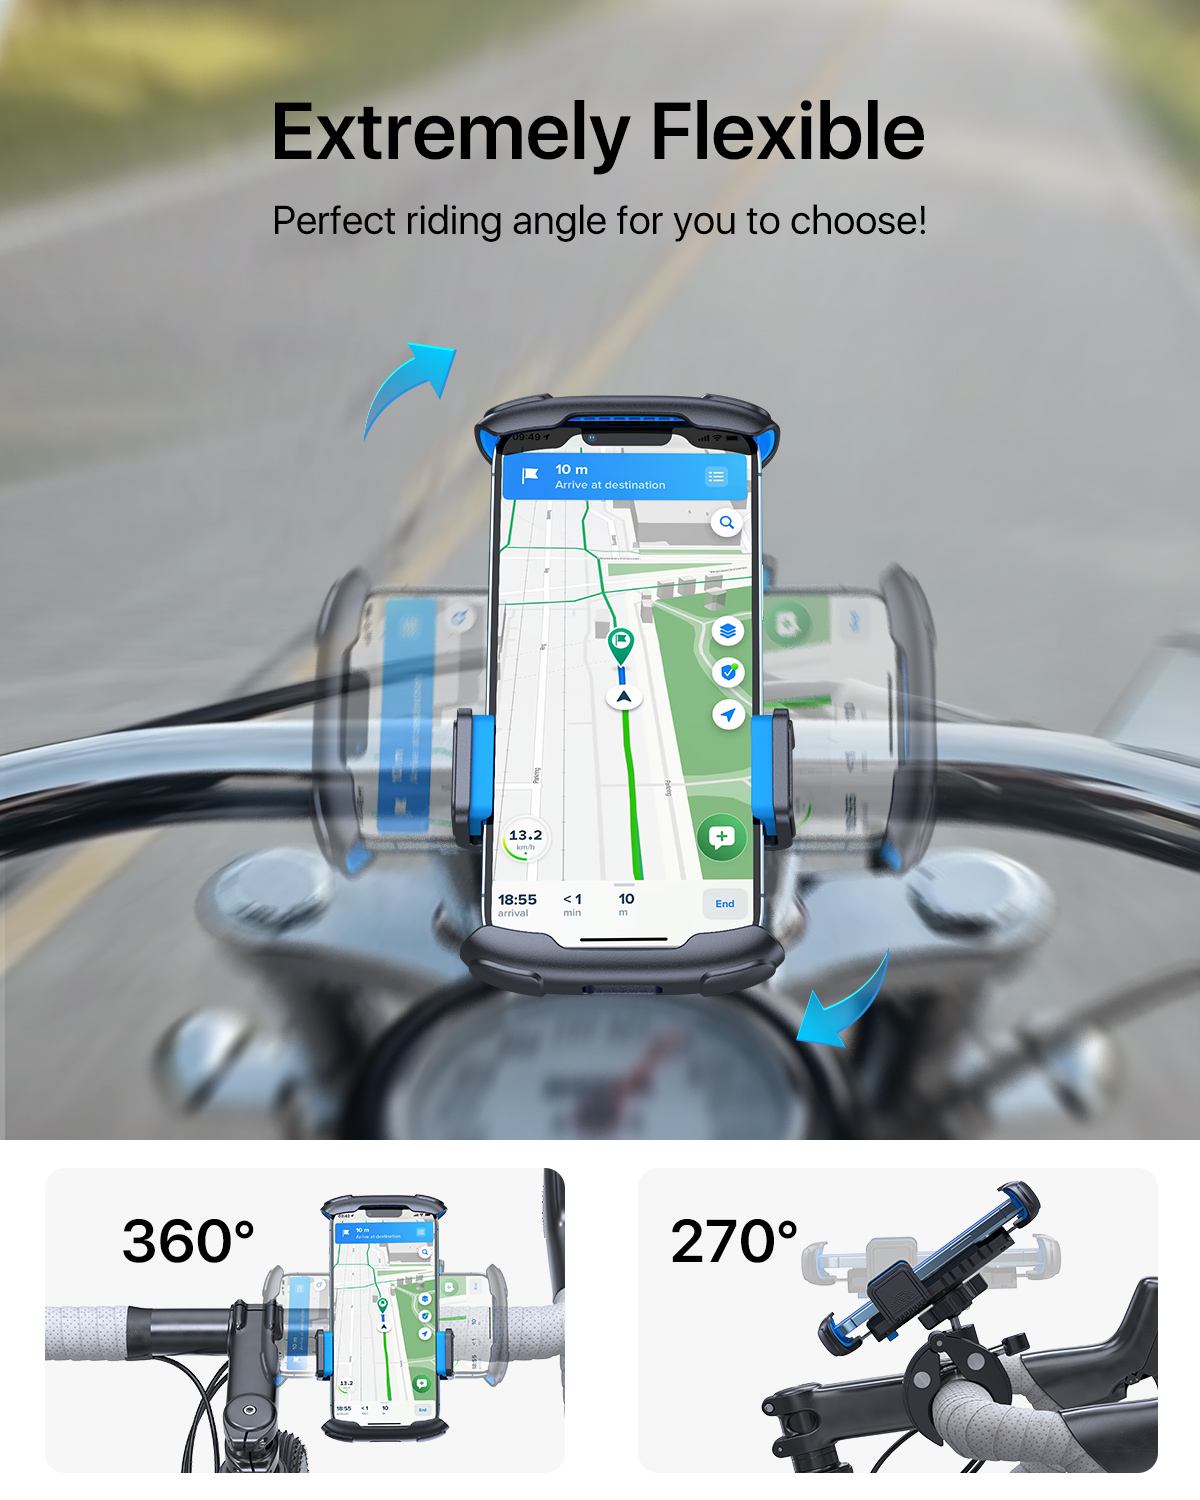 Anti-Shake & Stainless Steel Clamp Arms,Compatible with Smartphone GPS Other Devices Between 3.5 to 7 inches LoneRobe Bike Phone Mount,360°Rotation Bike Phone Holder/Motocycle Cell Phone Clamp 